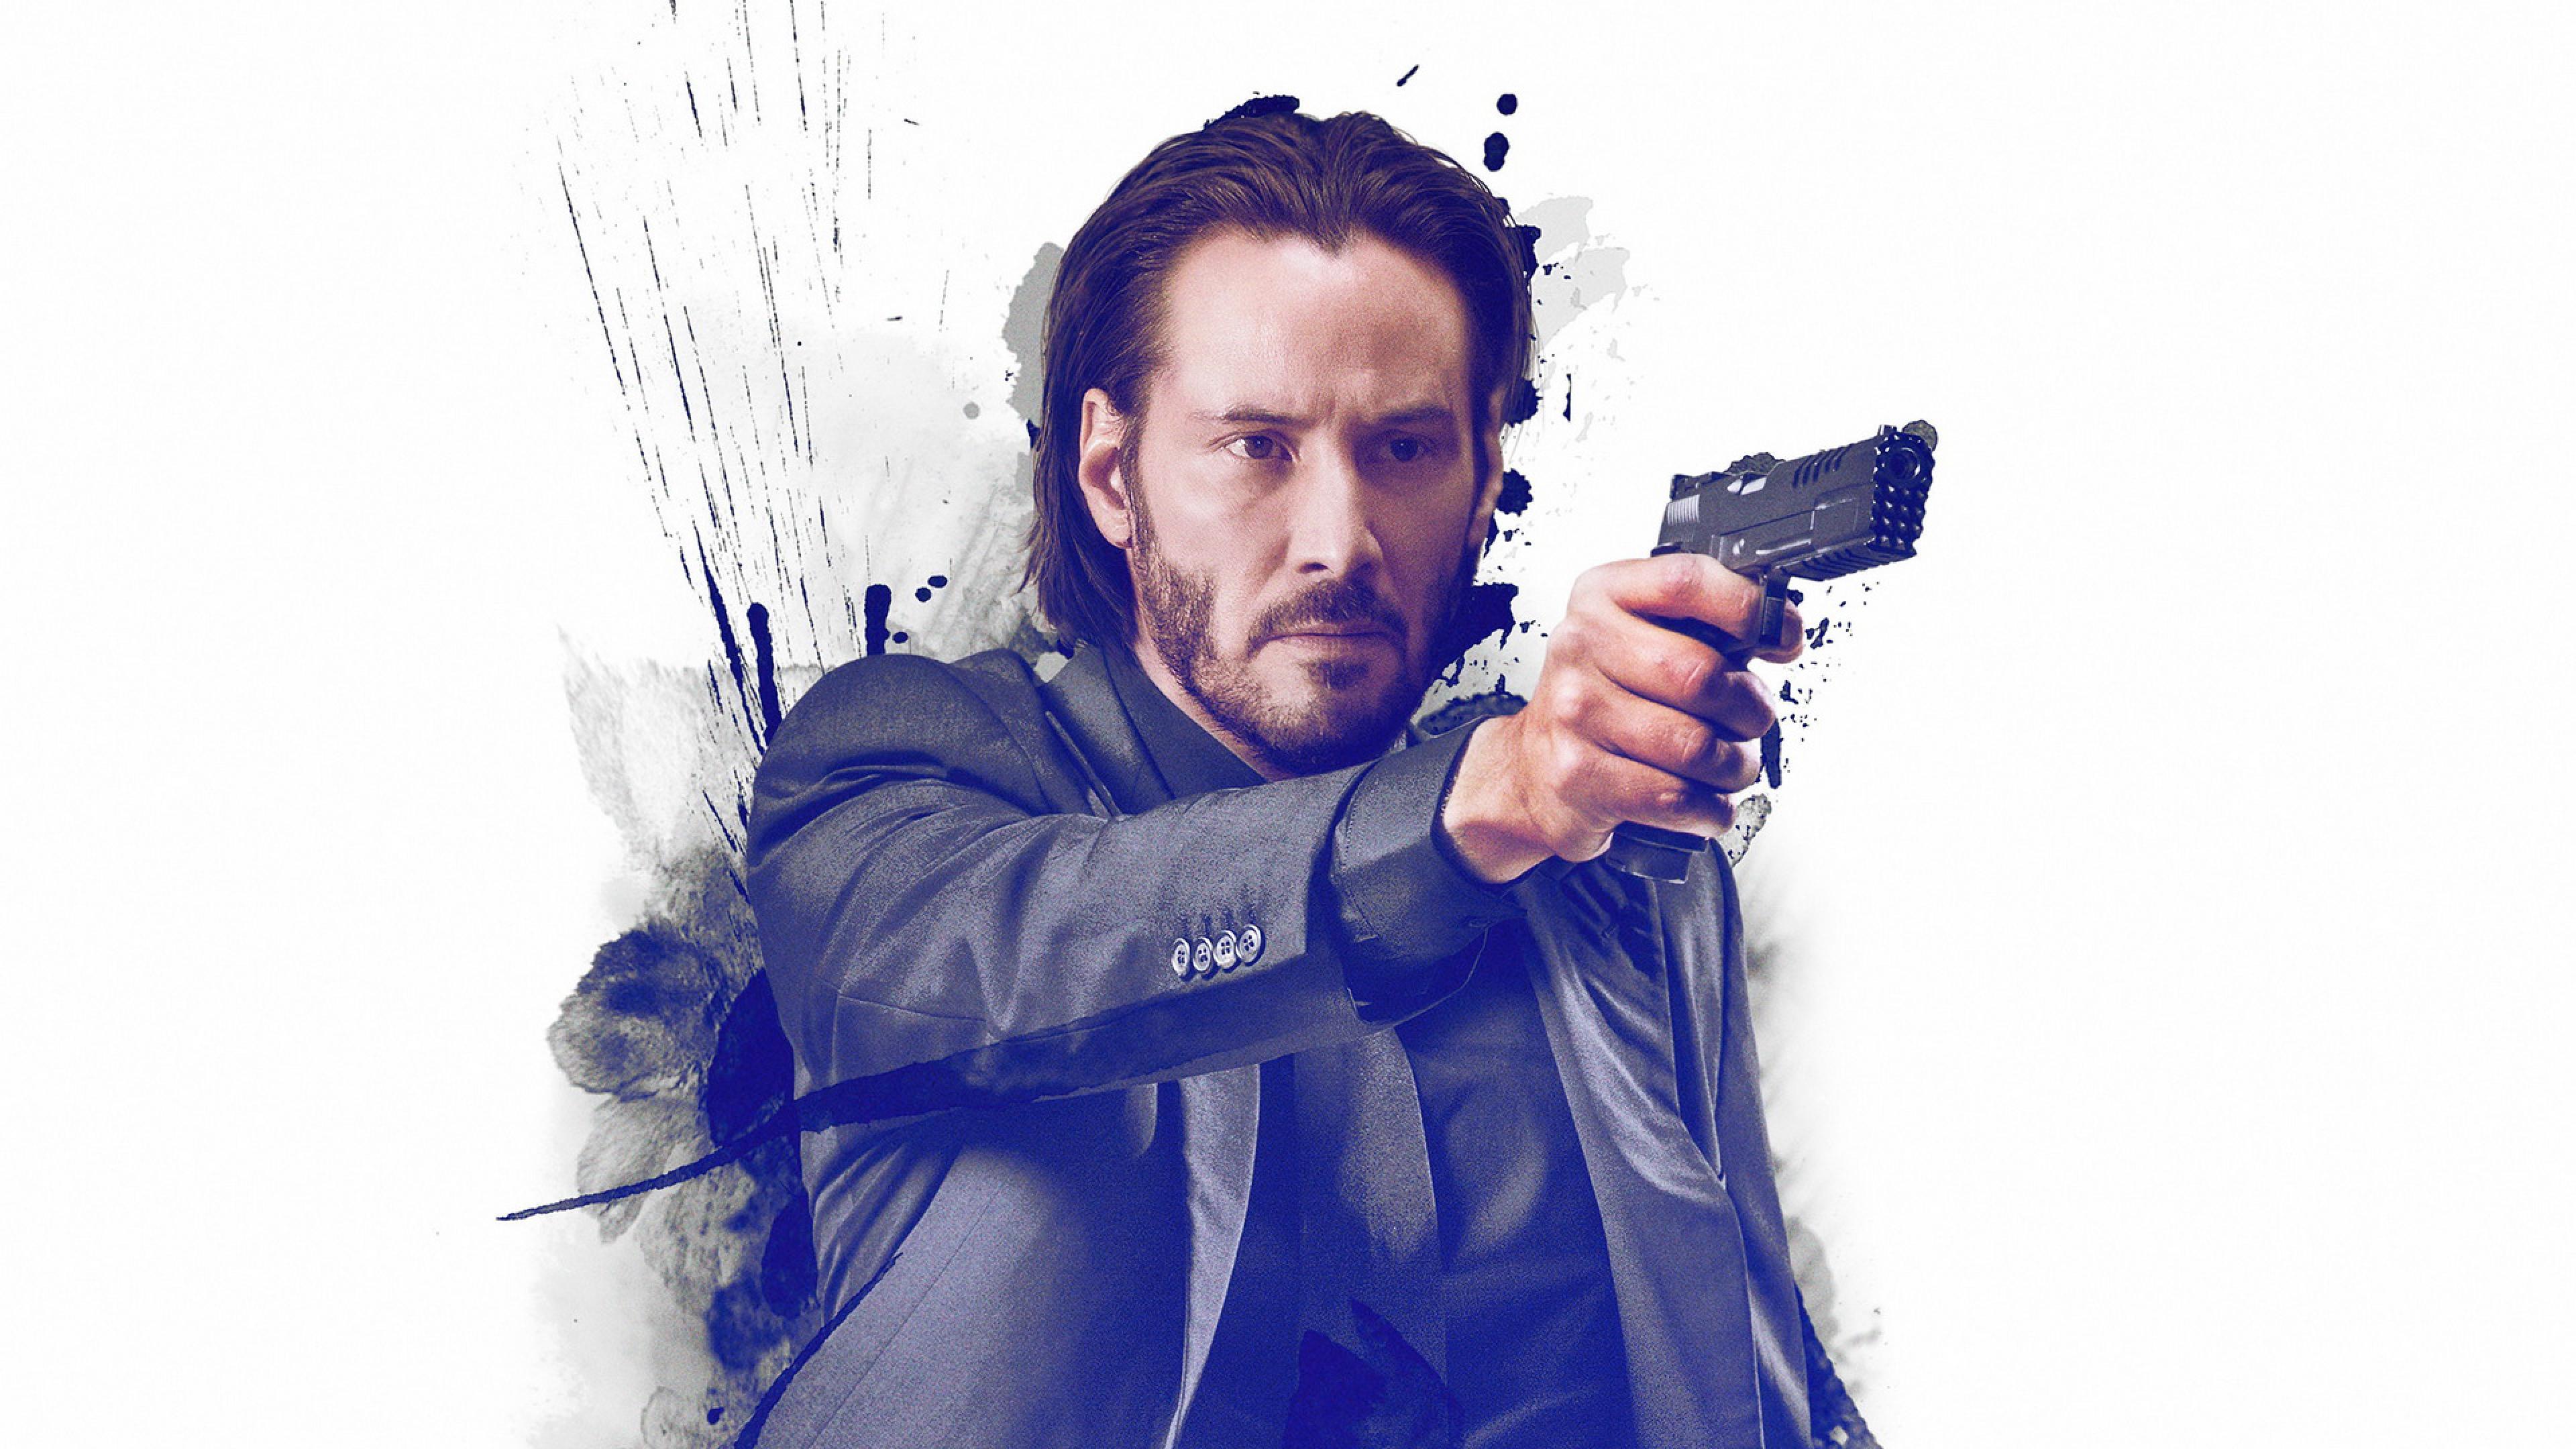 John Wick Wallpaper High Resolution and Quality Download